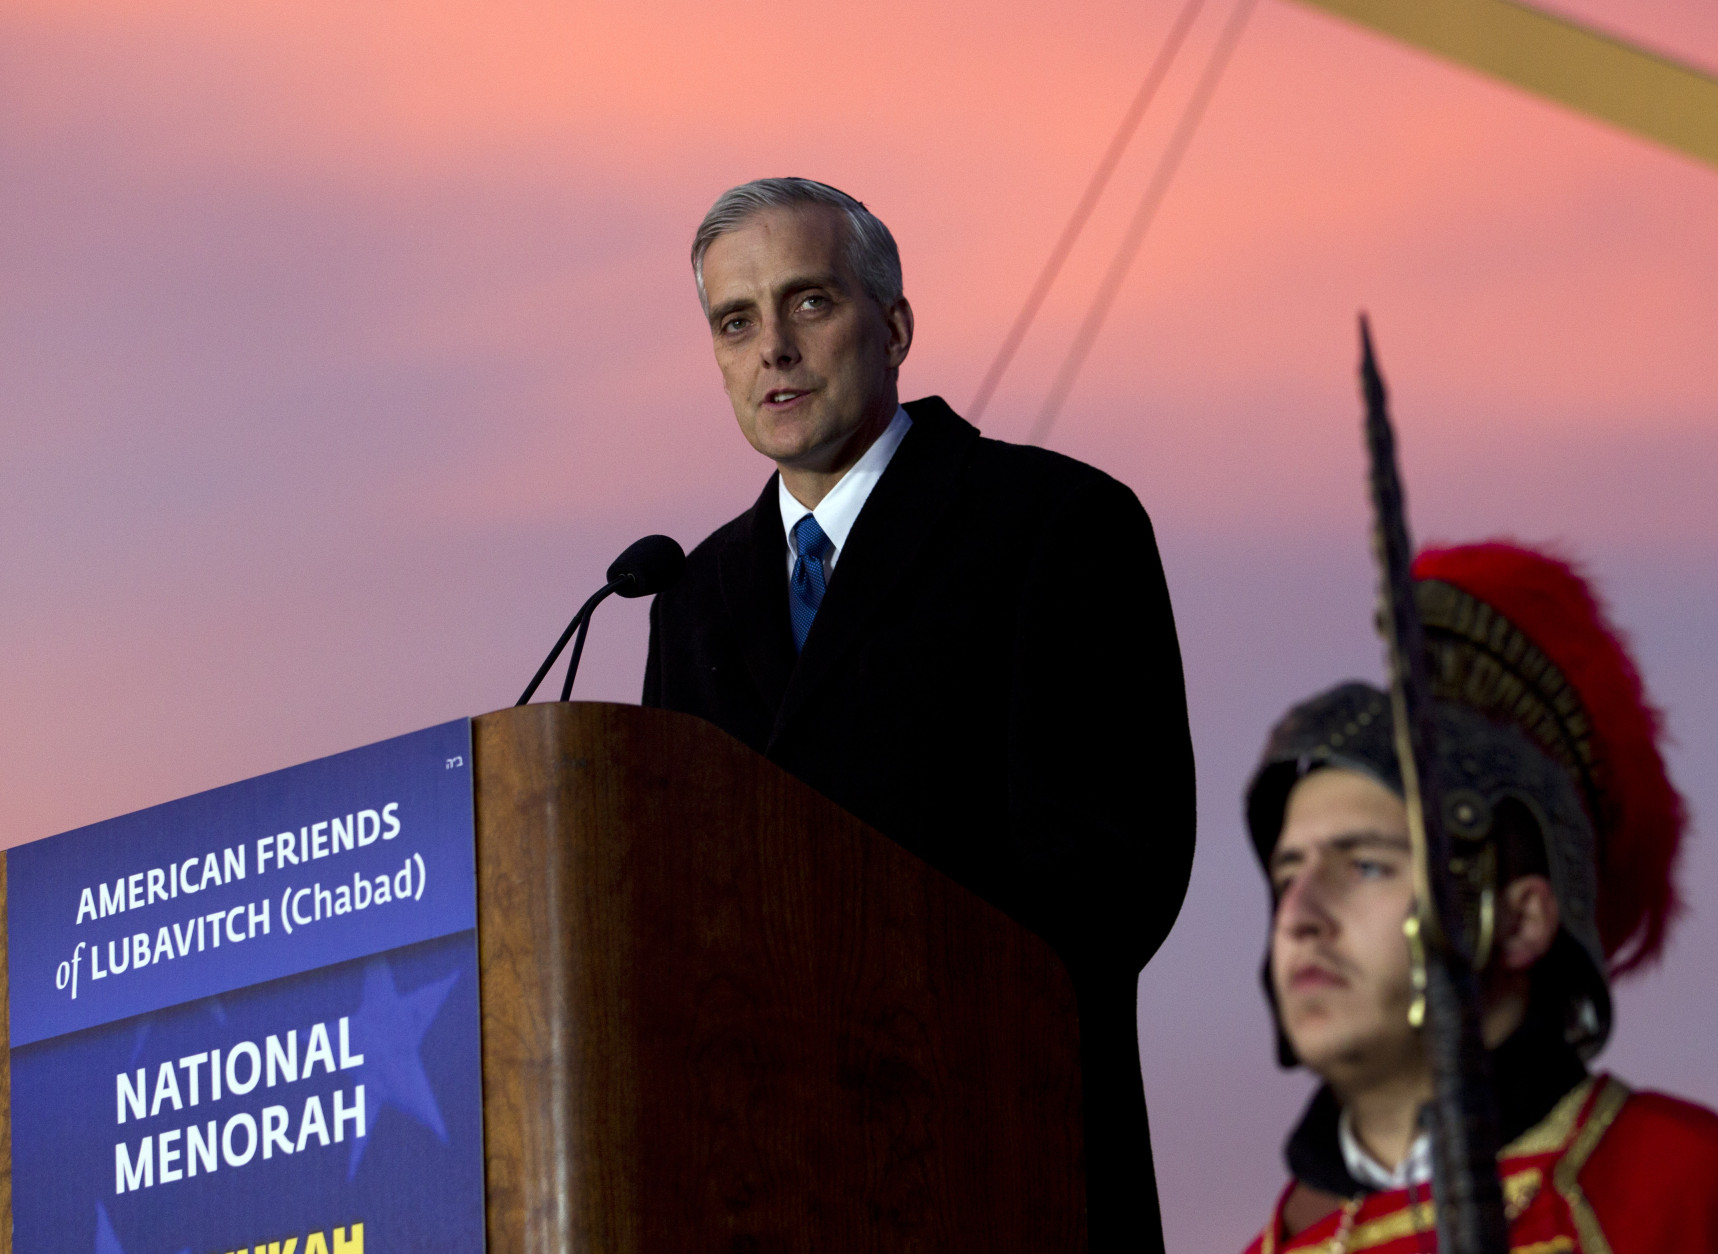 White House Chief of Staff Denis McDonough speaks during the annual National Menorah Lighting in celebration of Hanukkah, on the Ellipse near the White House in Washington, Sunday, Dec. 6, 2015. (AP Photo/Jose Luis Magana)